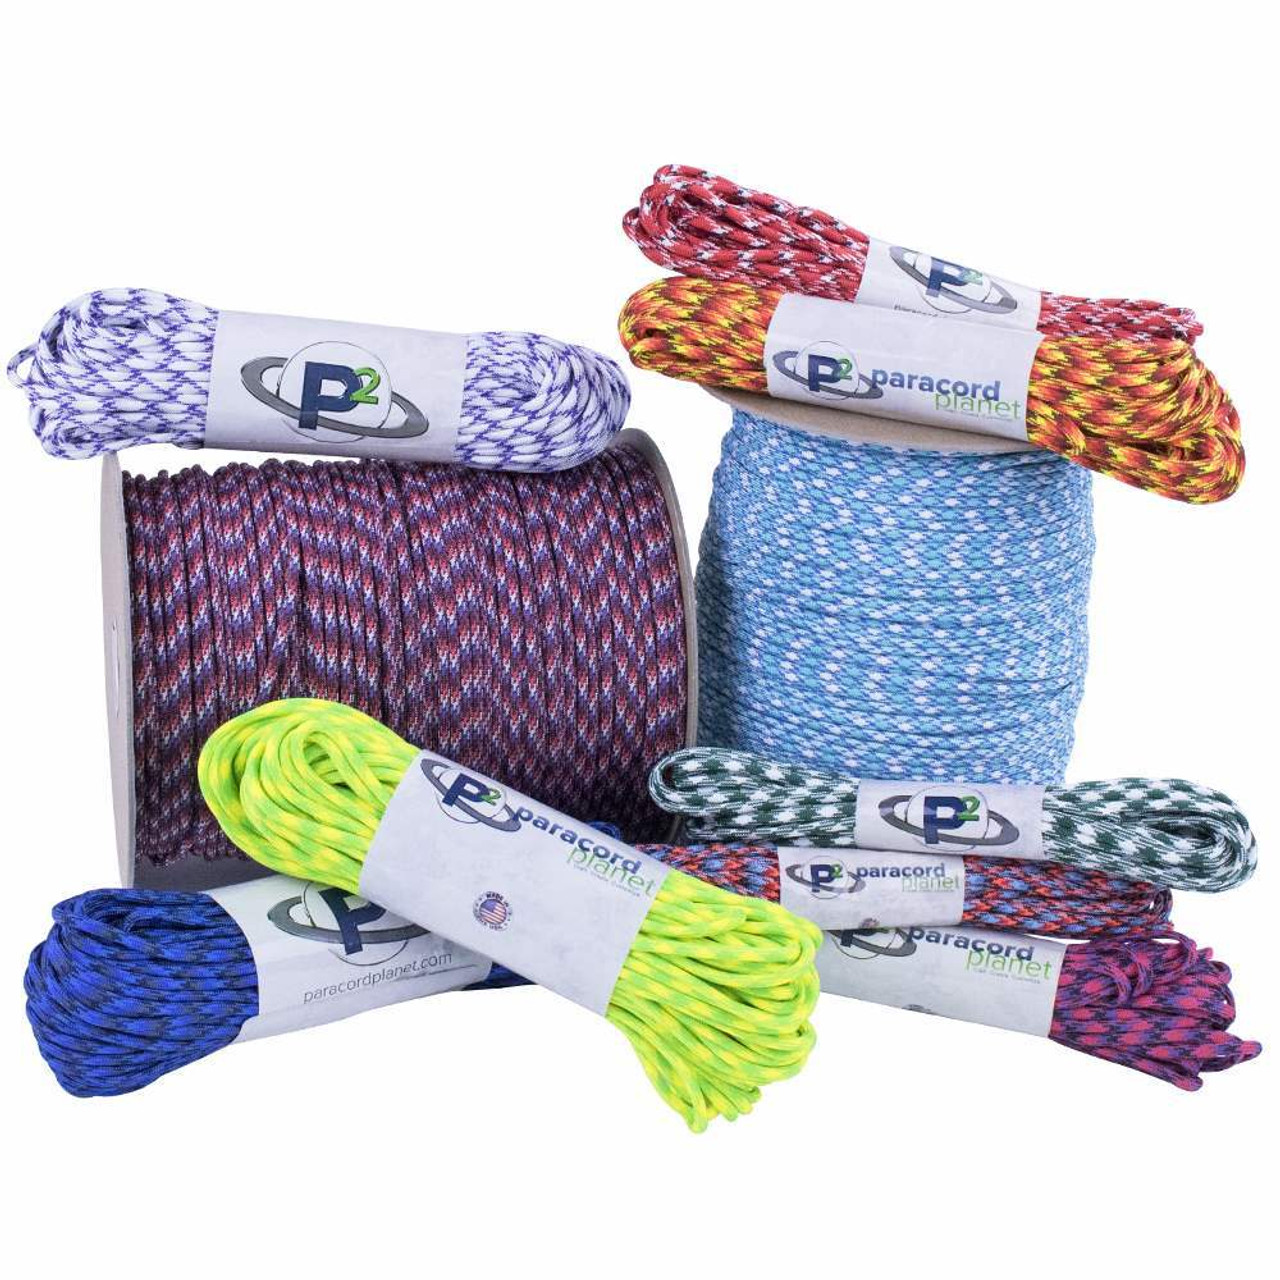 PARACORD PLANET Wilderness Cord - 11 Strand Core - Multiple Colors and  Lengths